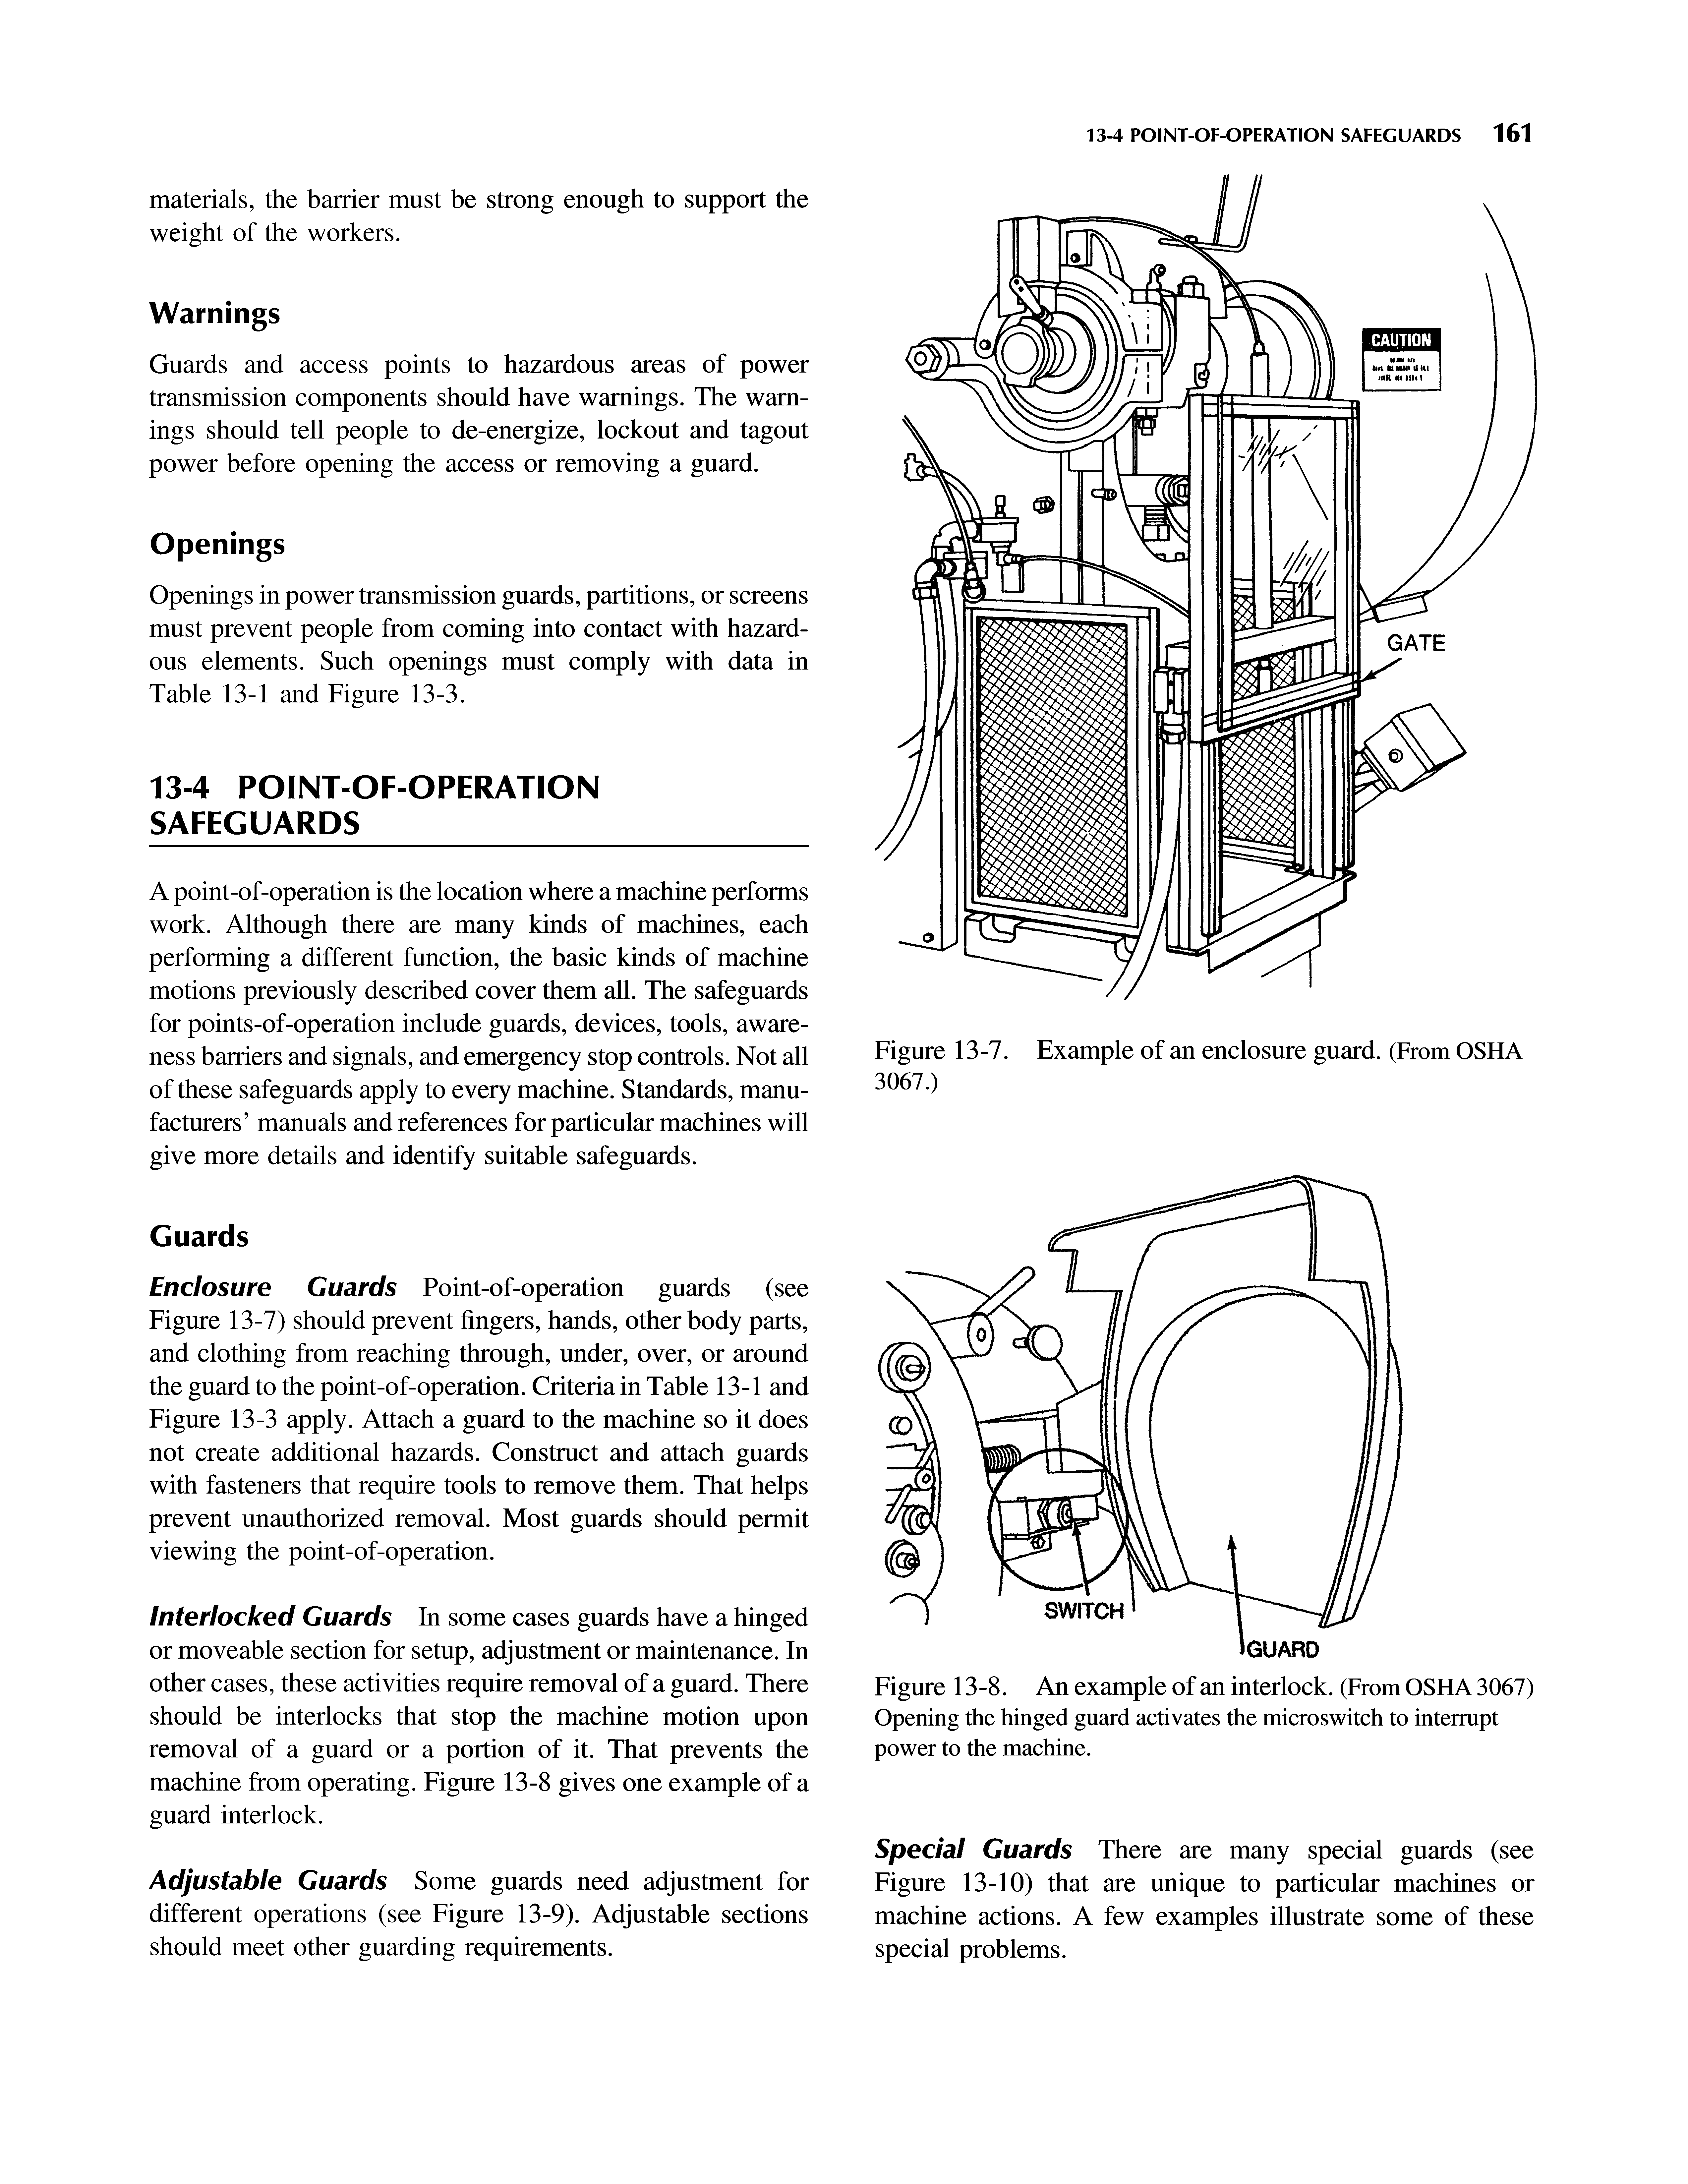 Figure 13-8. An example of an interlock. (From OSHA 3067) Opening the hinged guard activates the microswitch to interrupt power to the machine.